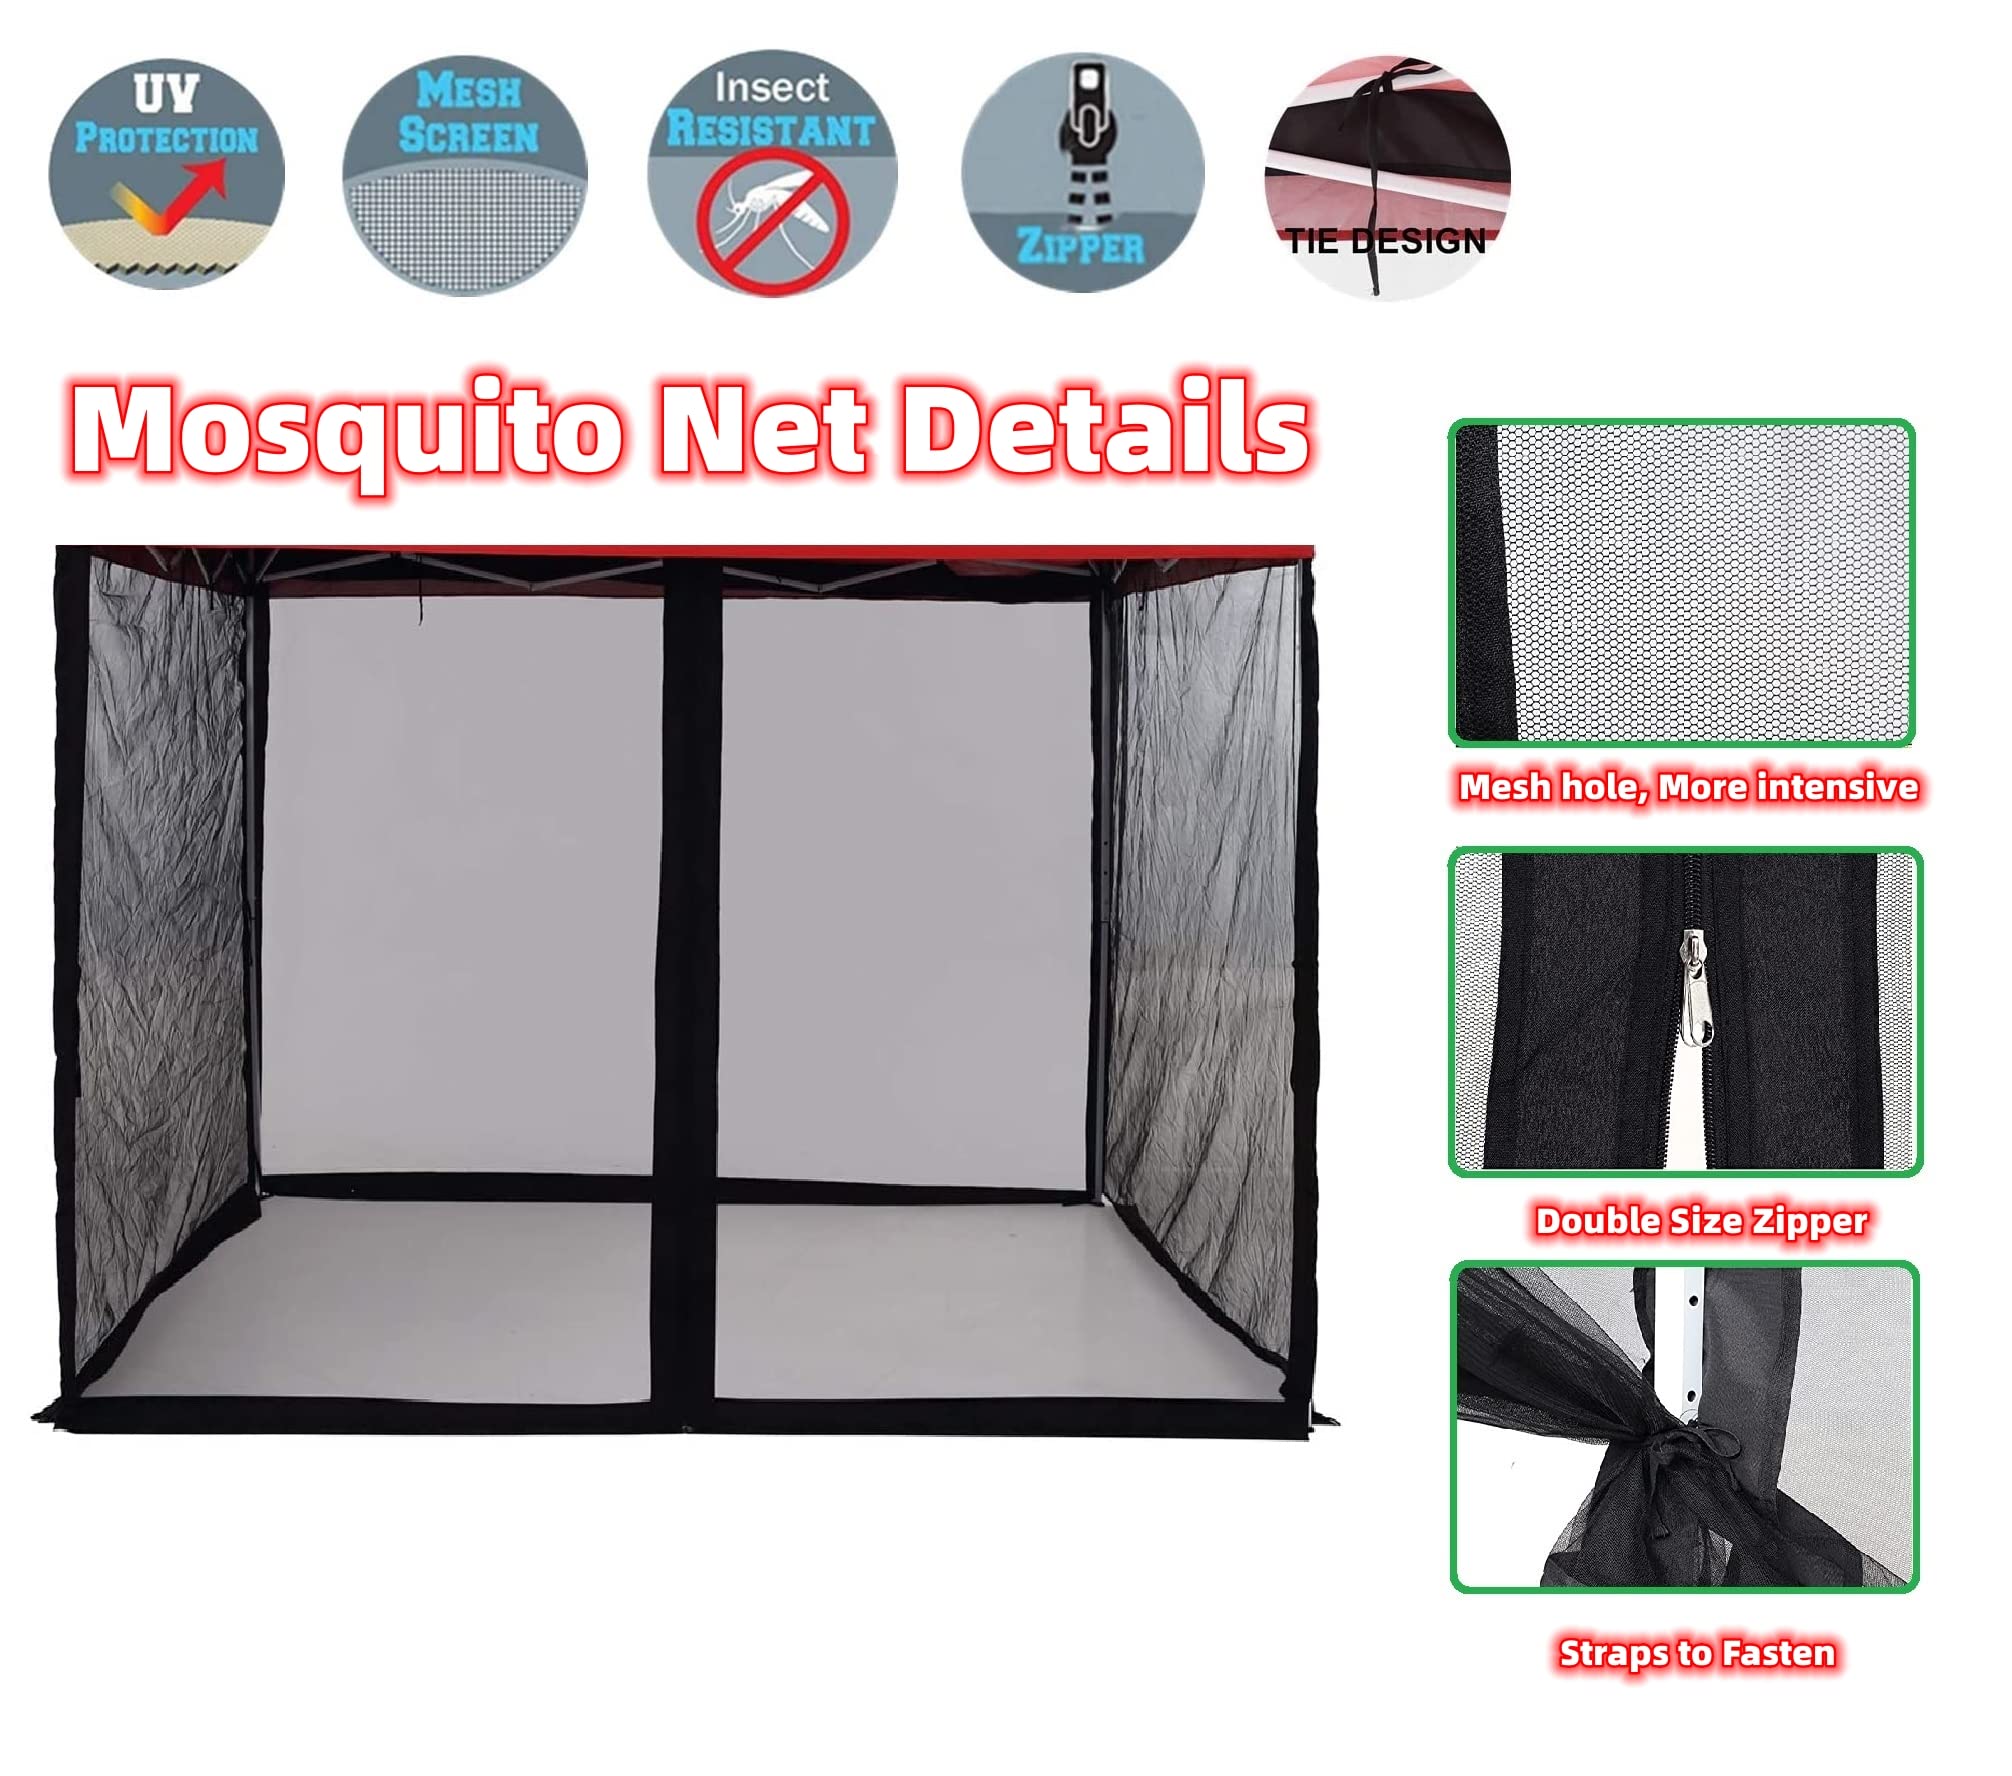 Mosquito Net for 10x10 Canopy Tent,Replacement Mosquito Netting for Gazebo Netting Screen Mosquito Screen Canopy for Camping for Patio Tent 10x10' (Mosquito Netting Only, Black 1)